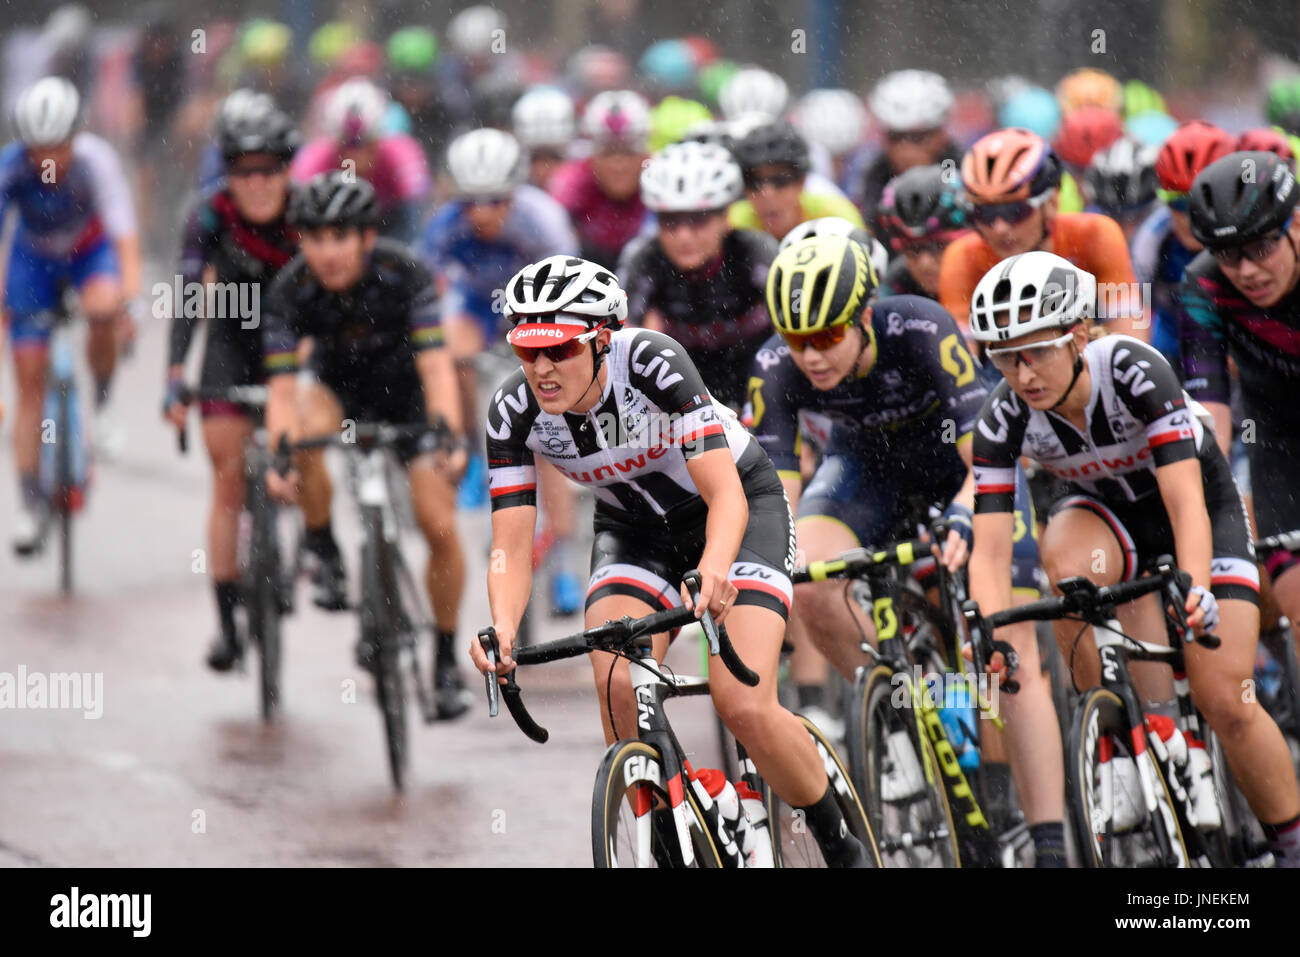 Classique UCI World Tour women's professional cycle race. Part of Ride London bicycle event around St. James's Park, UK. Wet race Stock Photo